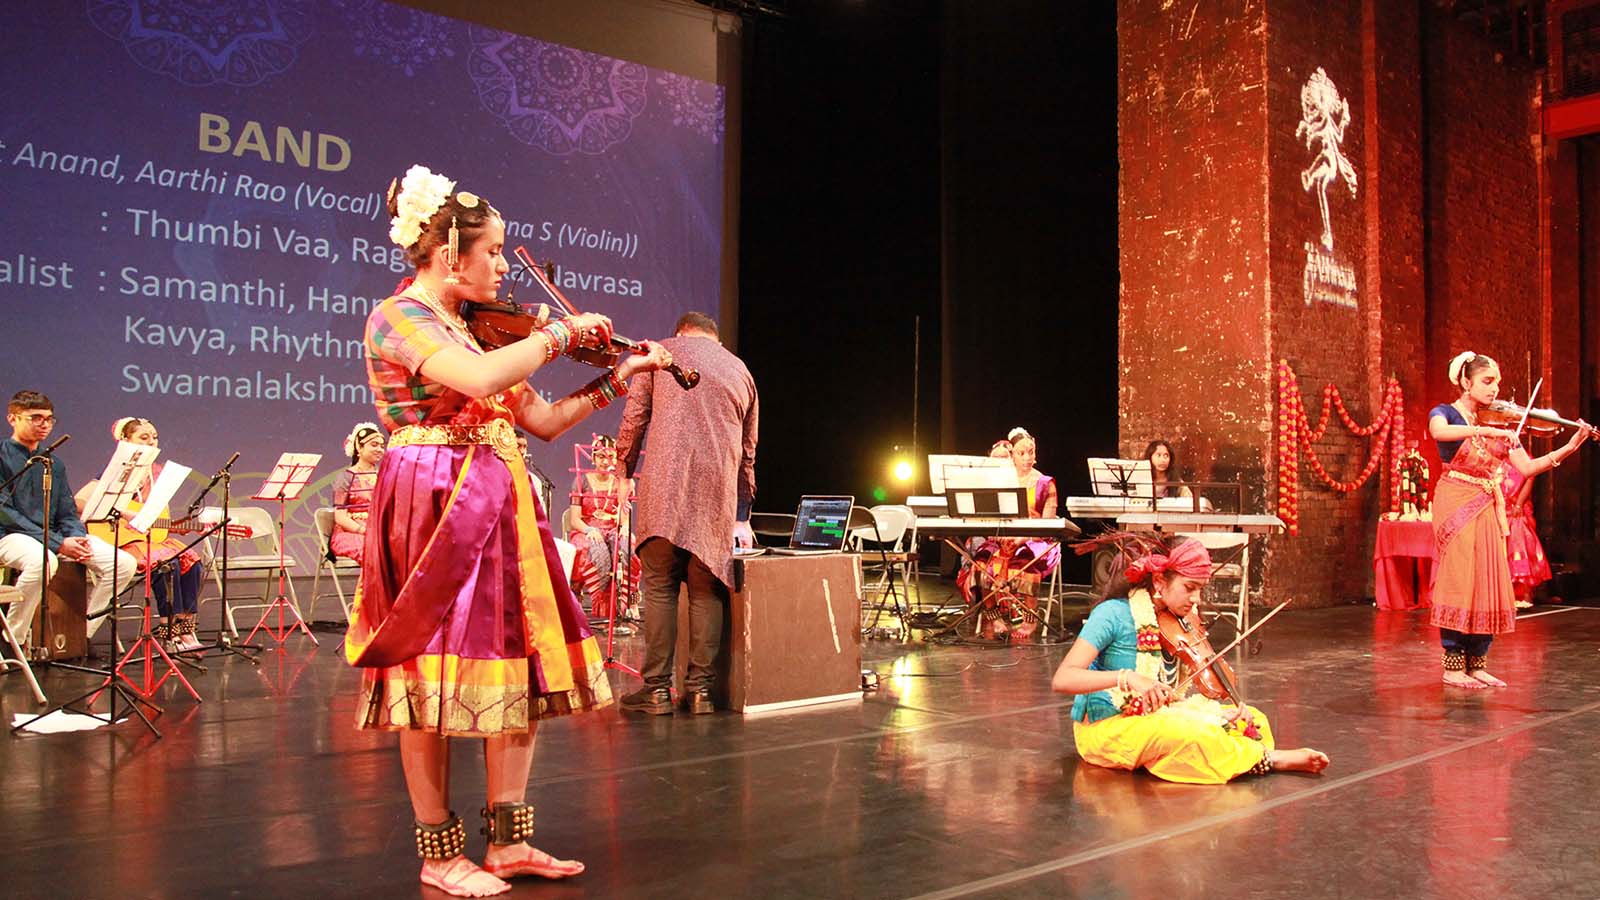 Three young musicians playing violins and wearing traditional Indian dress . Two are standing on the right and left and one is seated. Behind them a band sits next to their instruments - they are listening to the other musicians. A large projection behind them names the musicians.